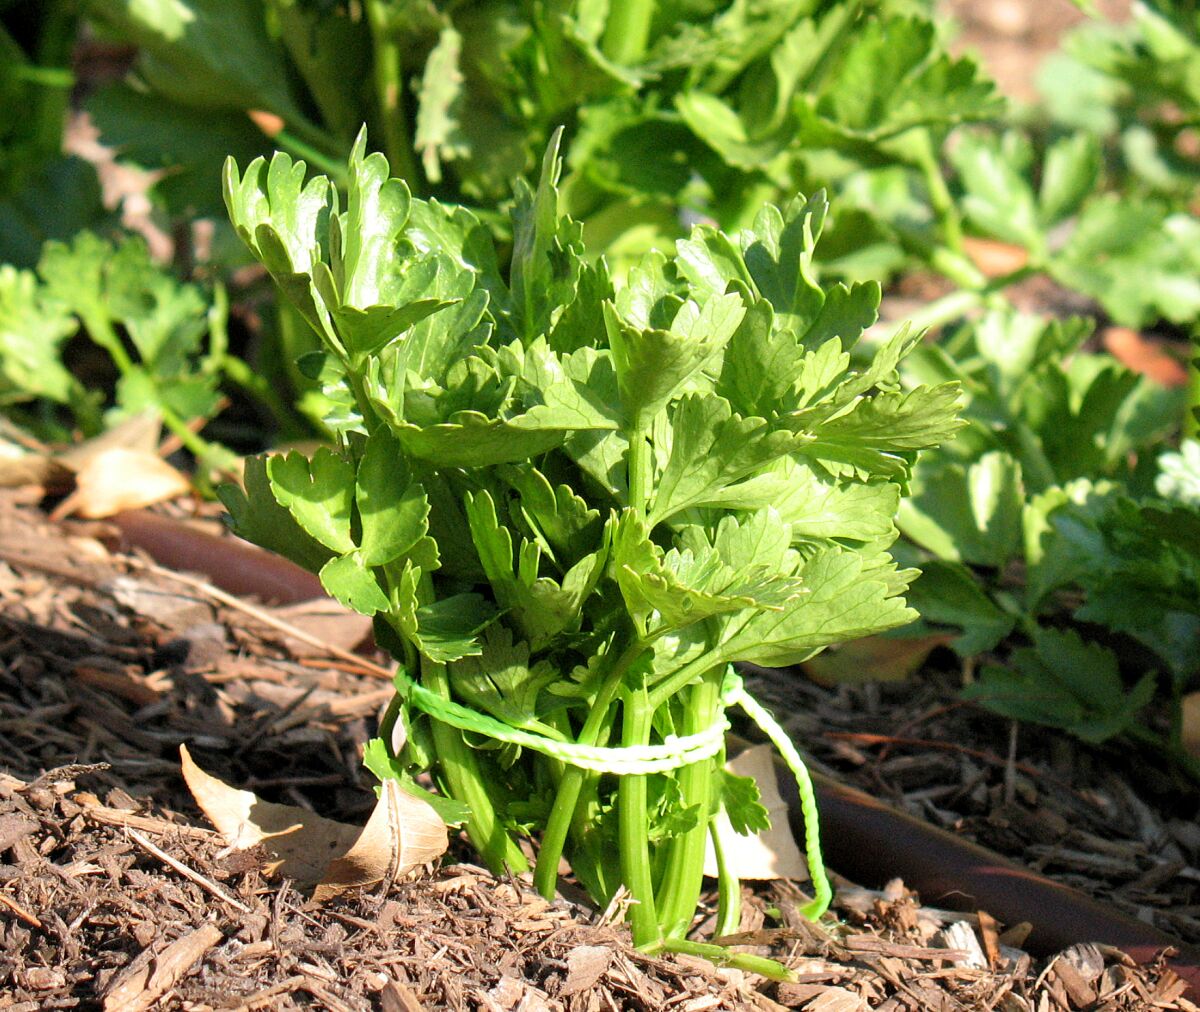 If you prefer the paler, sweeter celery that's protected from the sun, you can tie up the young stalks to protect the inner branches or cut the top and bottom off a half-gallon milk carton and push it over the young seedling like a sleeve to shade the stalks.